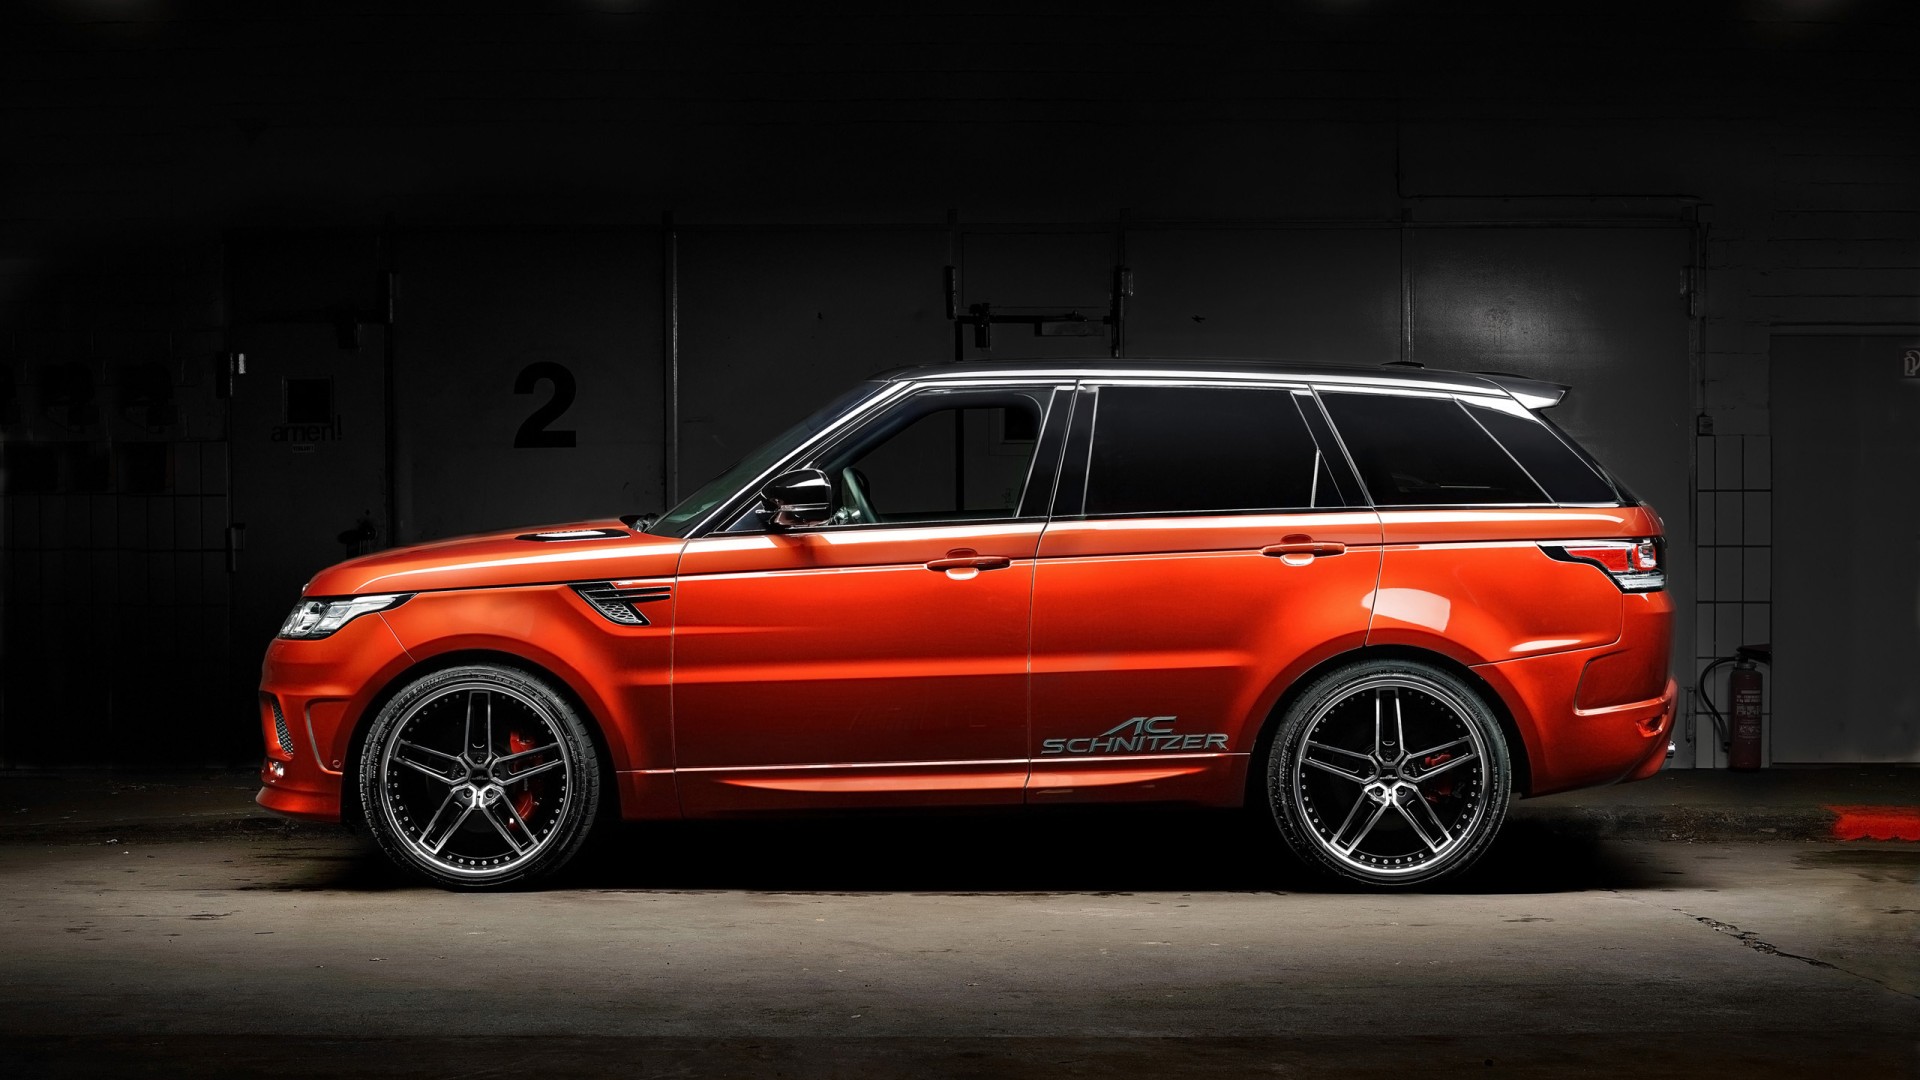 2014 Range Rover Sport By AC Schnitzer Wallpaper | HD Car Wallpapers